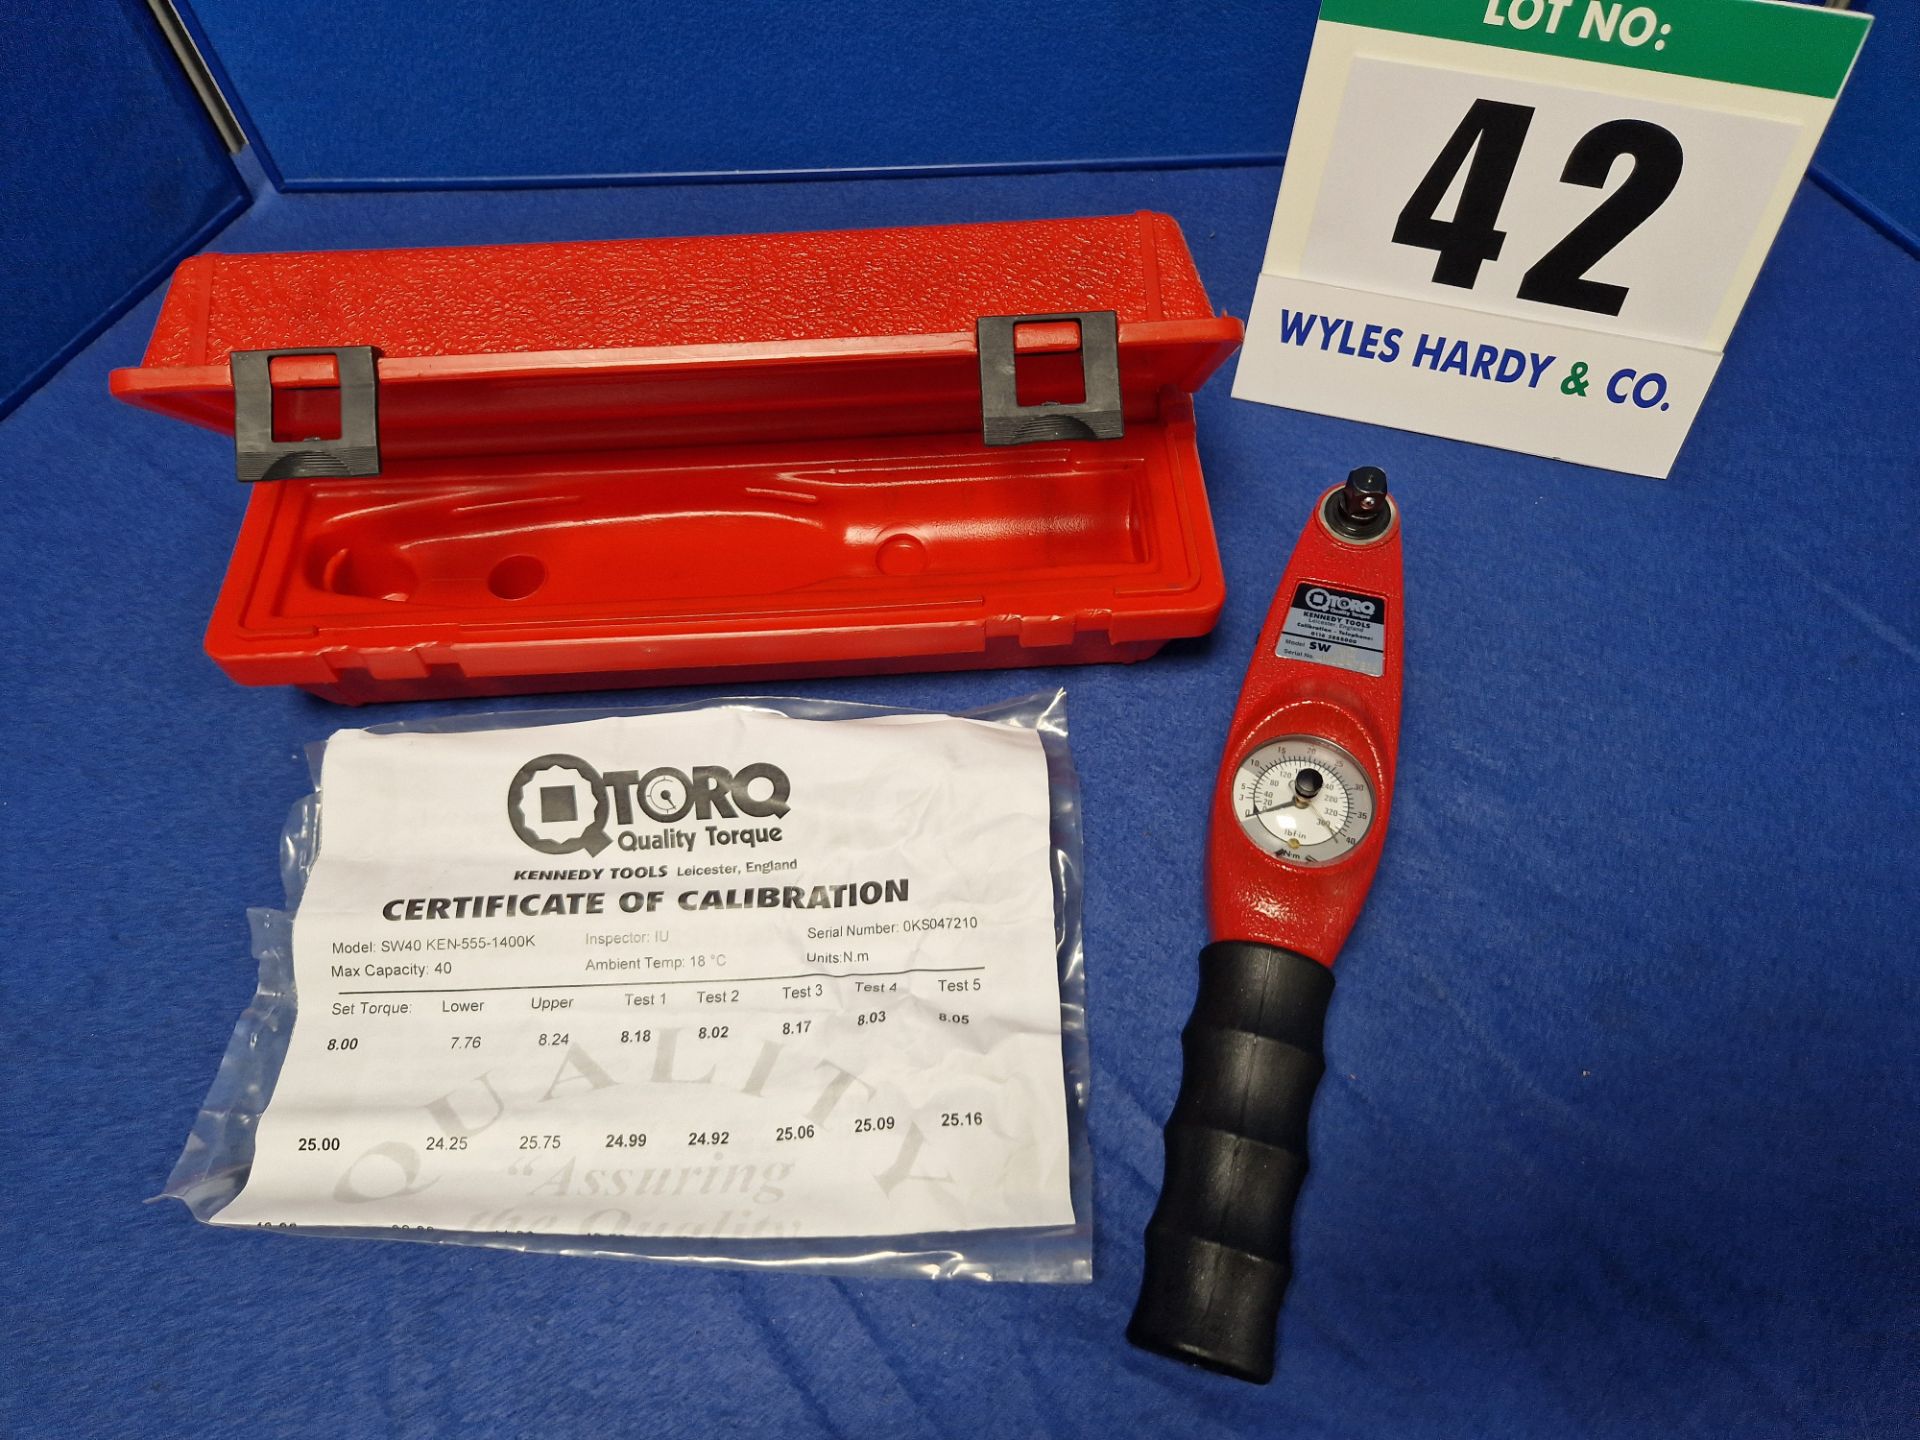 One TORO 5440 3/8 inch Square Drive 0-40Nm/360 lfb-in Dial Indicating Torque Wrench in Rigid Carry